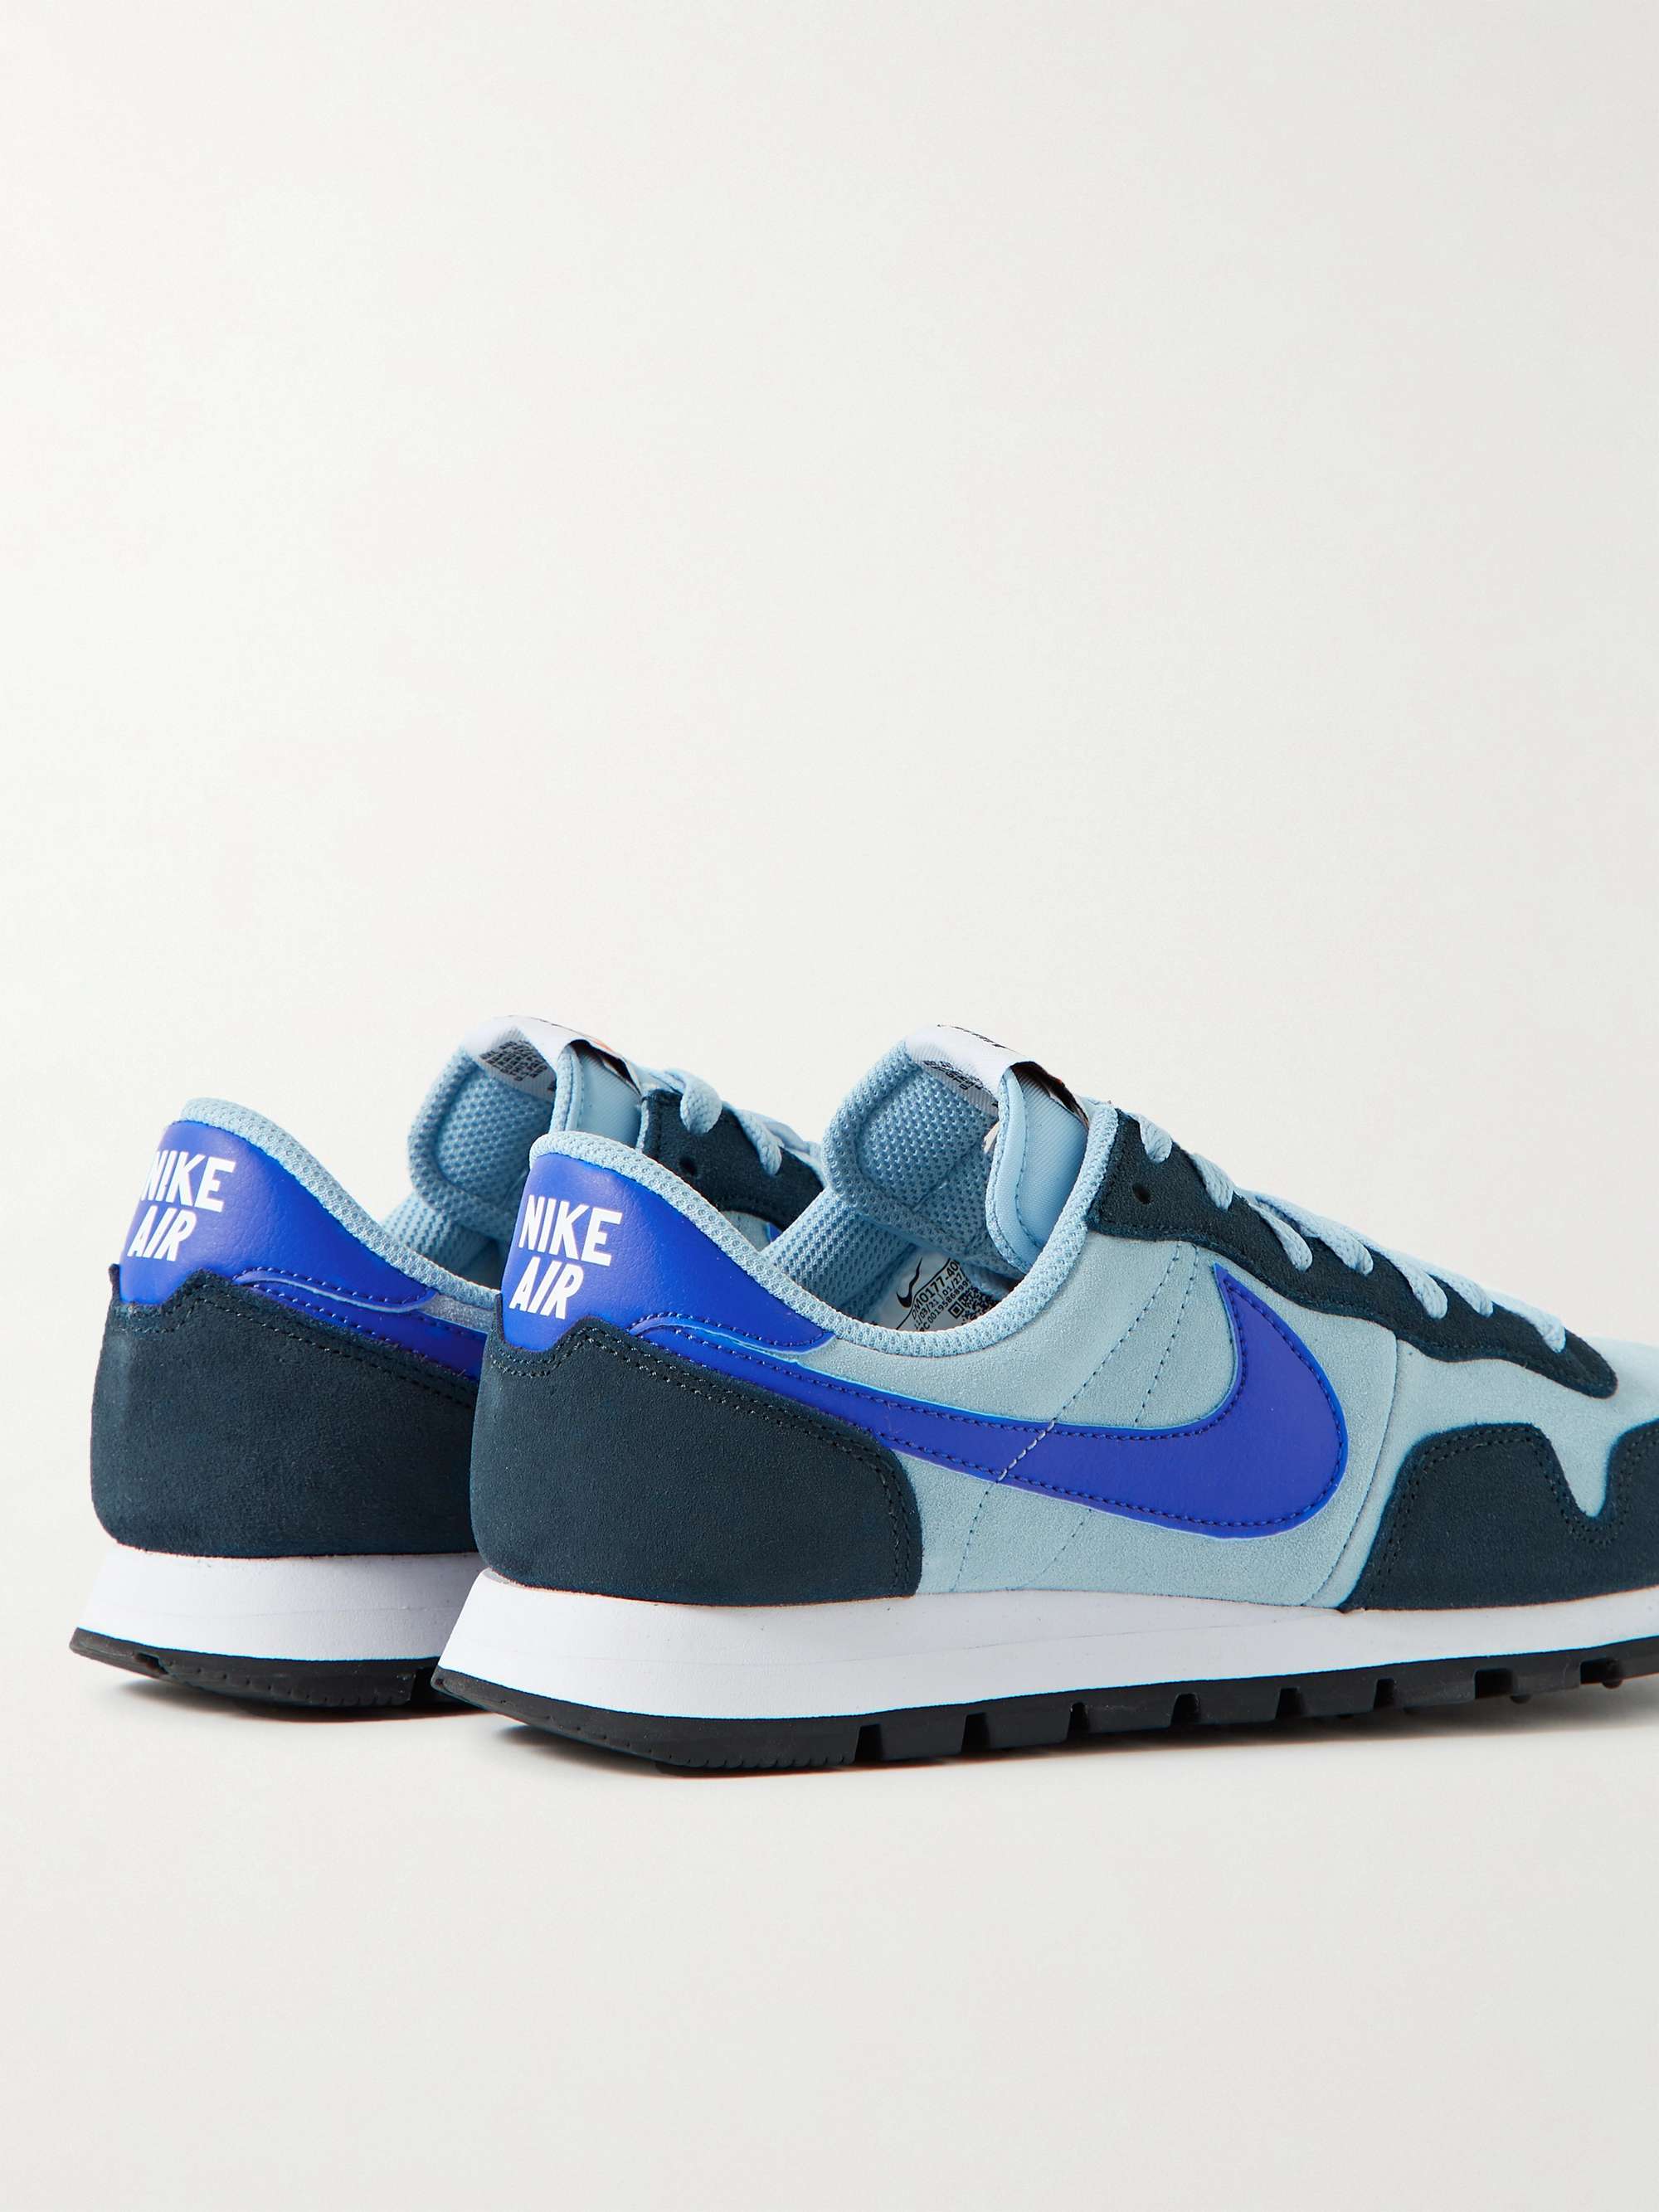 NIKE Air Pegasus 83 Leather-Trimmed Suede Sneakers | MR PORTER